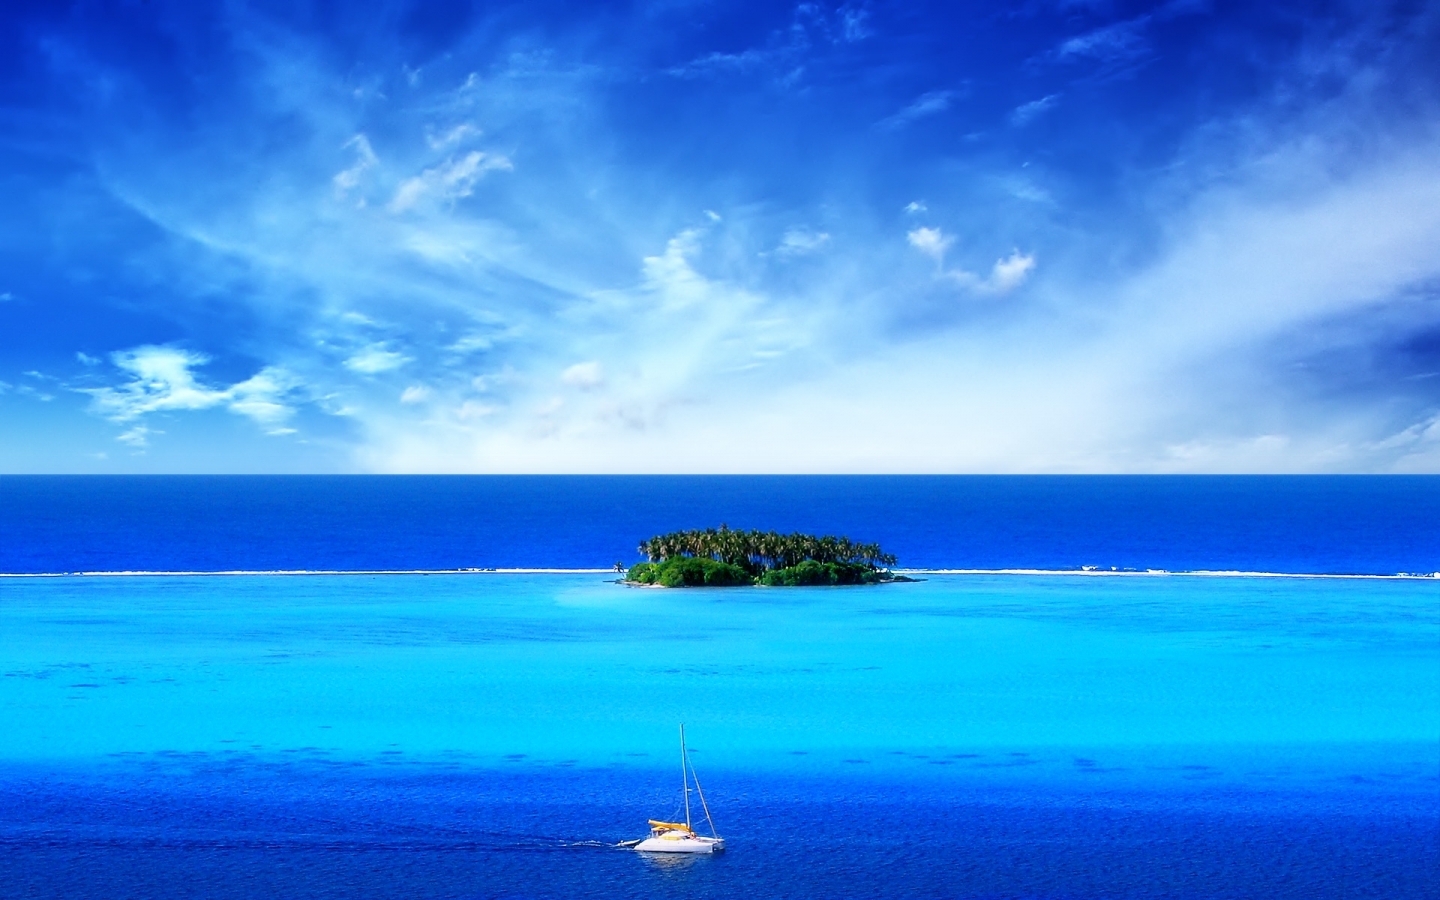 android yachts, landscape, sea, blue